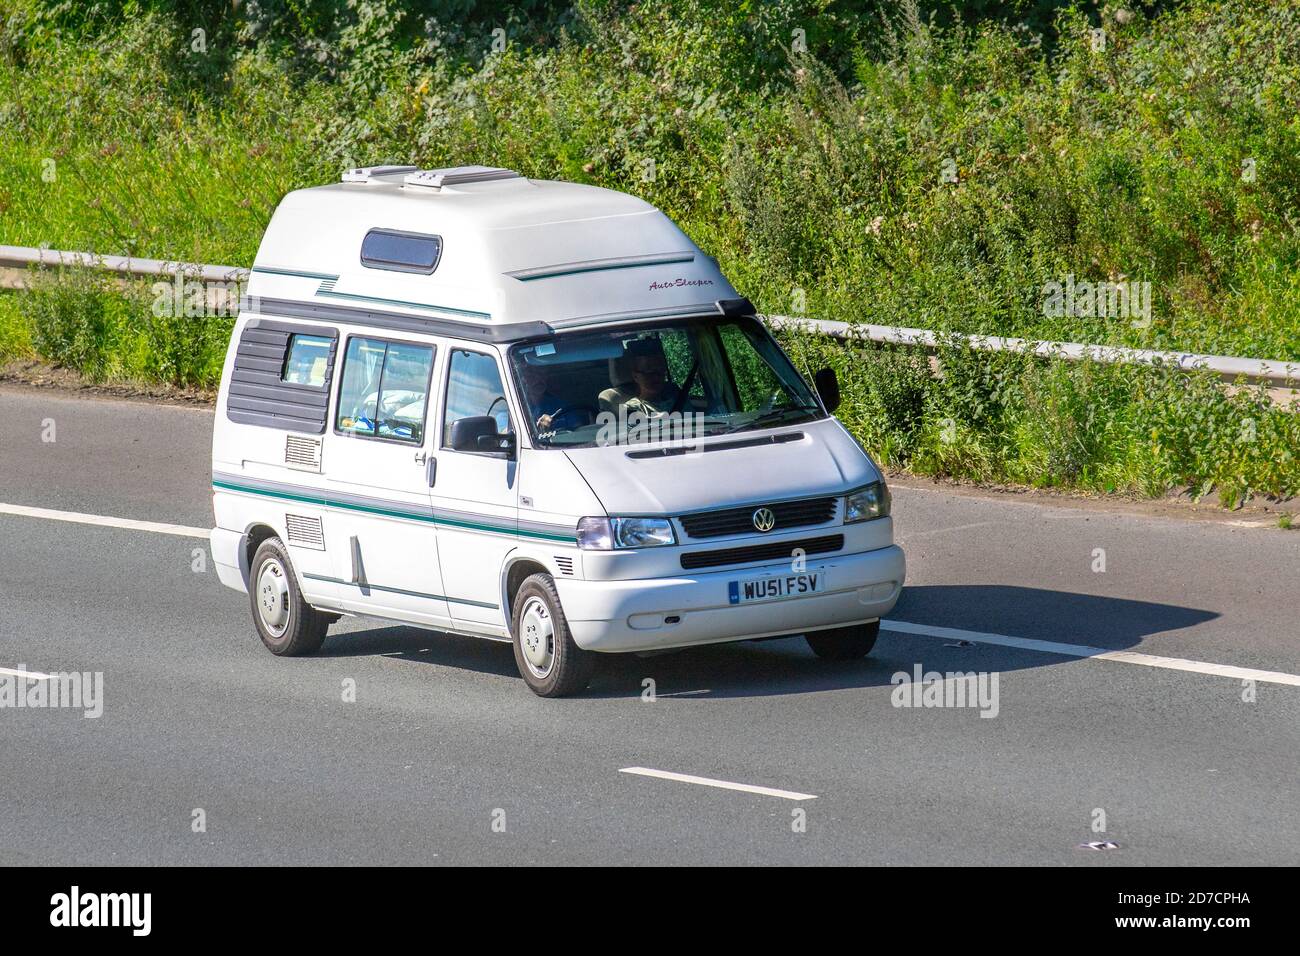 2001 Transporter Sd Lwb VW Volkswagen Caravans and Motorhomes, campervans on Britain's roads, RV leisure vehicle, family holidays, caravanette vacations, Touring caravan holiday, van conversions, Vanagon autohome, life on the road, Stock Photo